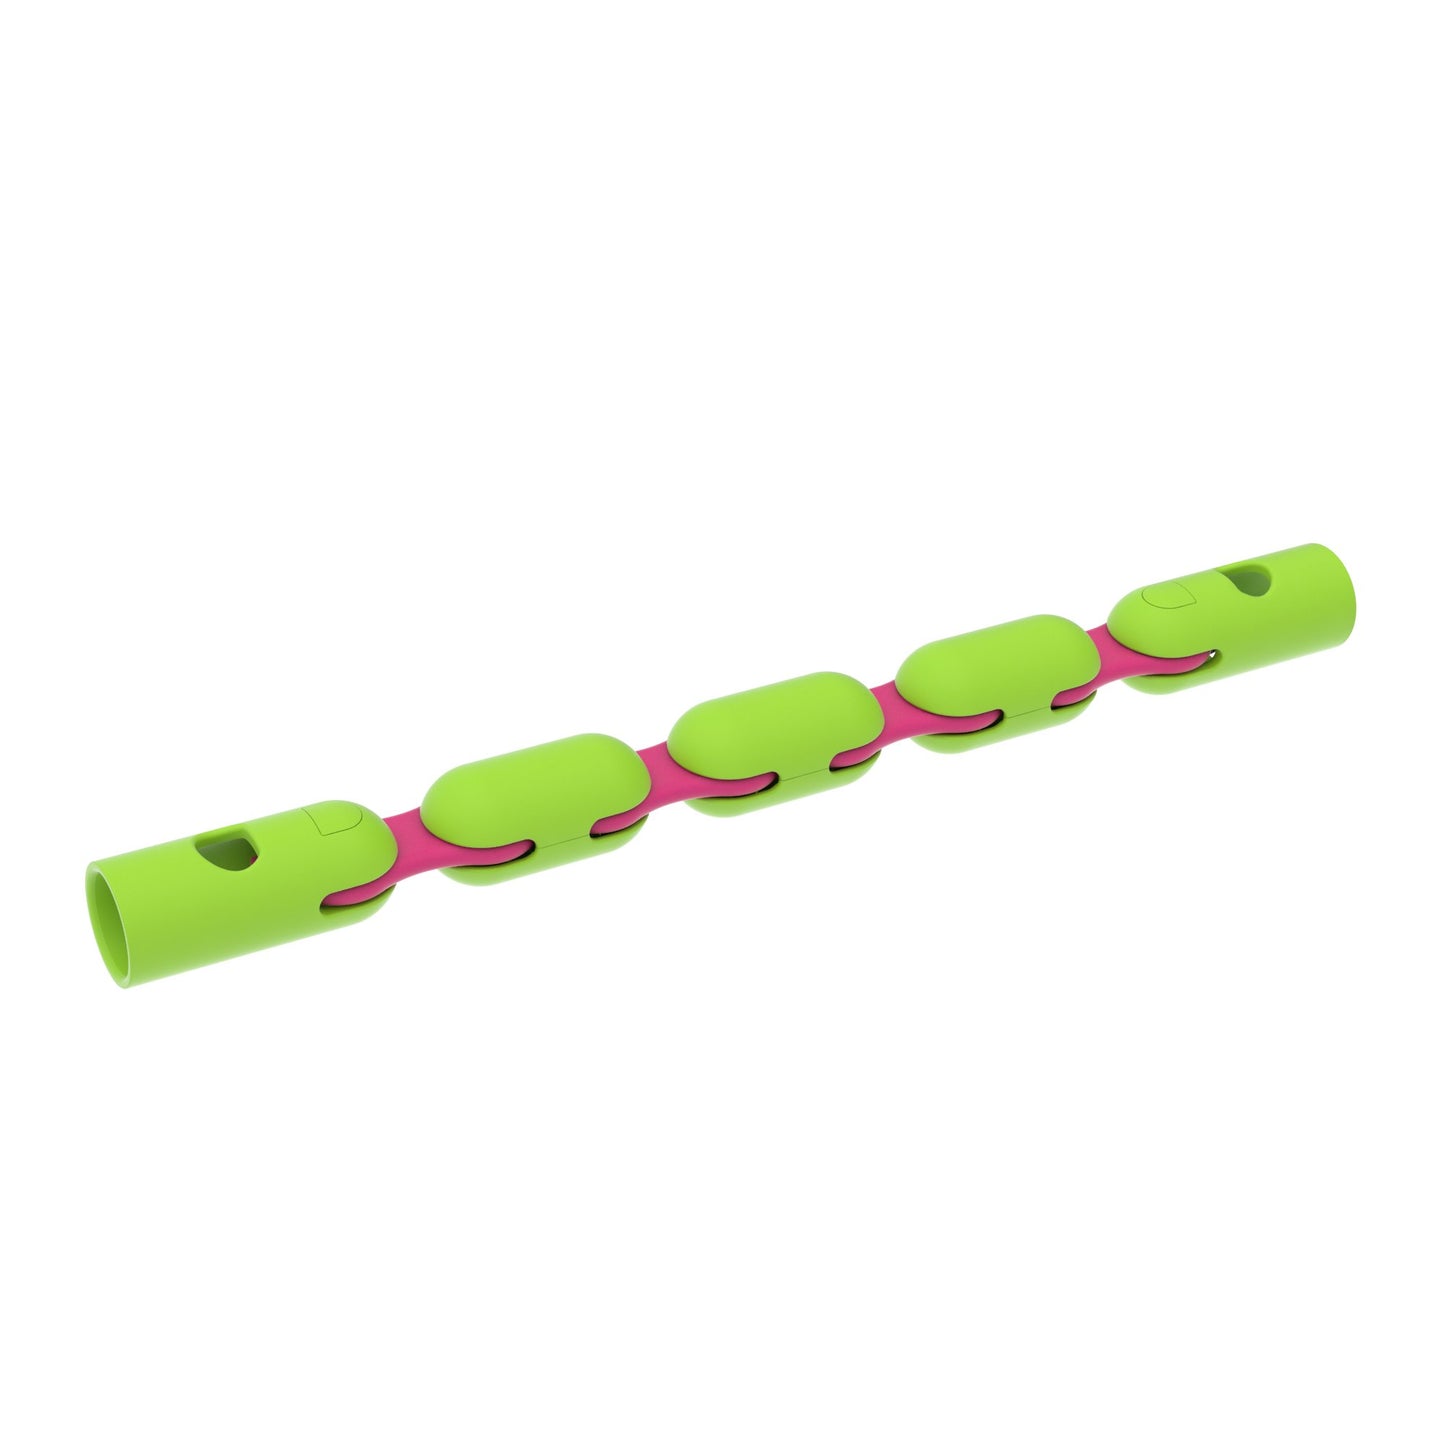 Spare part - Quadie Trailie - Chain without clasps